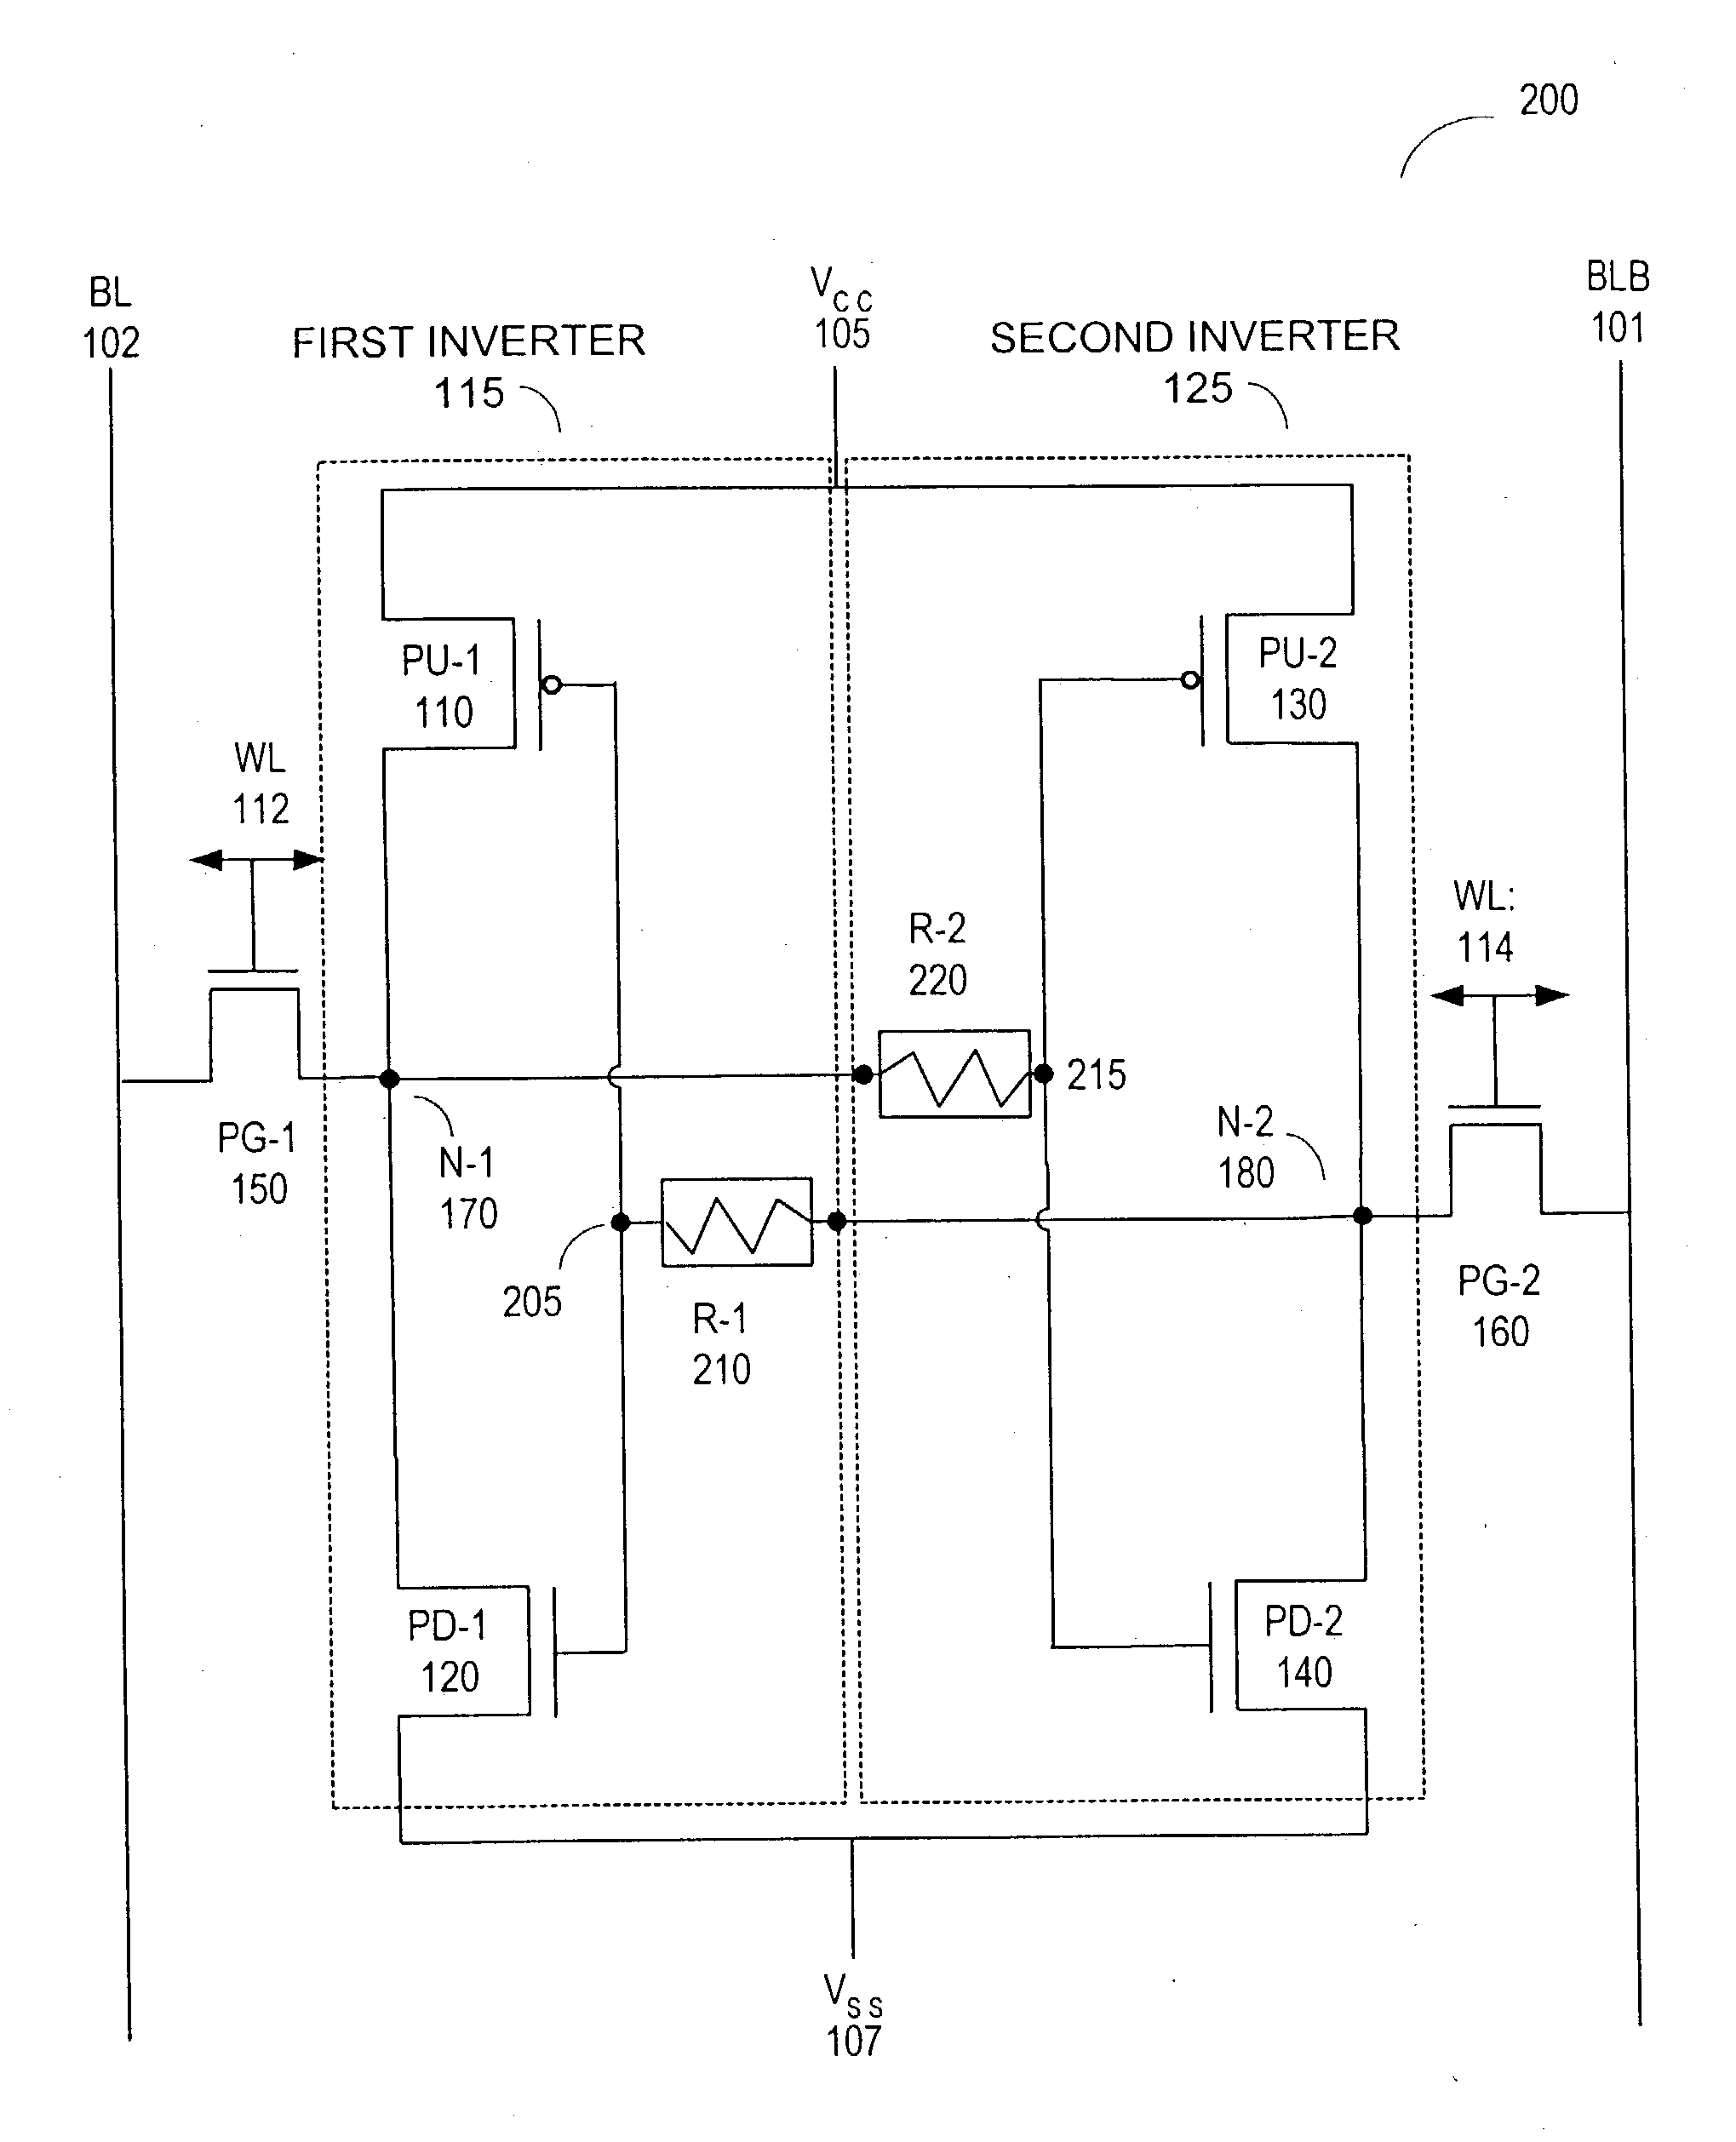 SRAM cell design with high resistor CMOS gate structure for soft error rate improvement